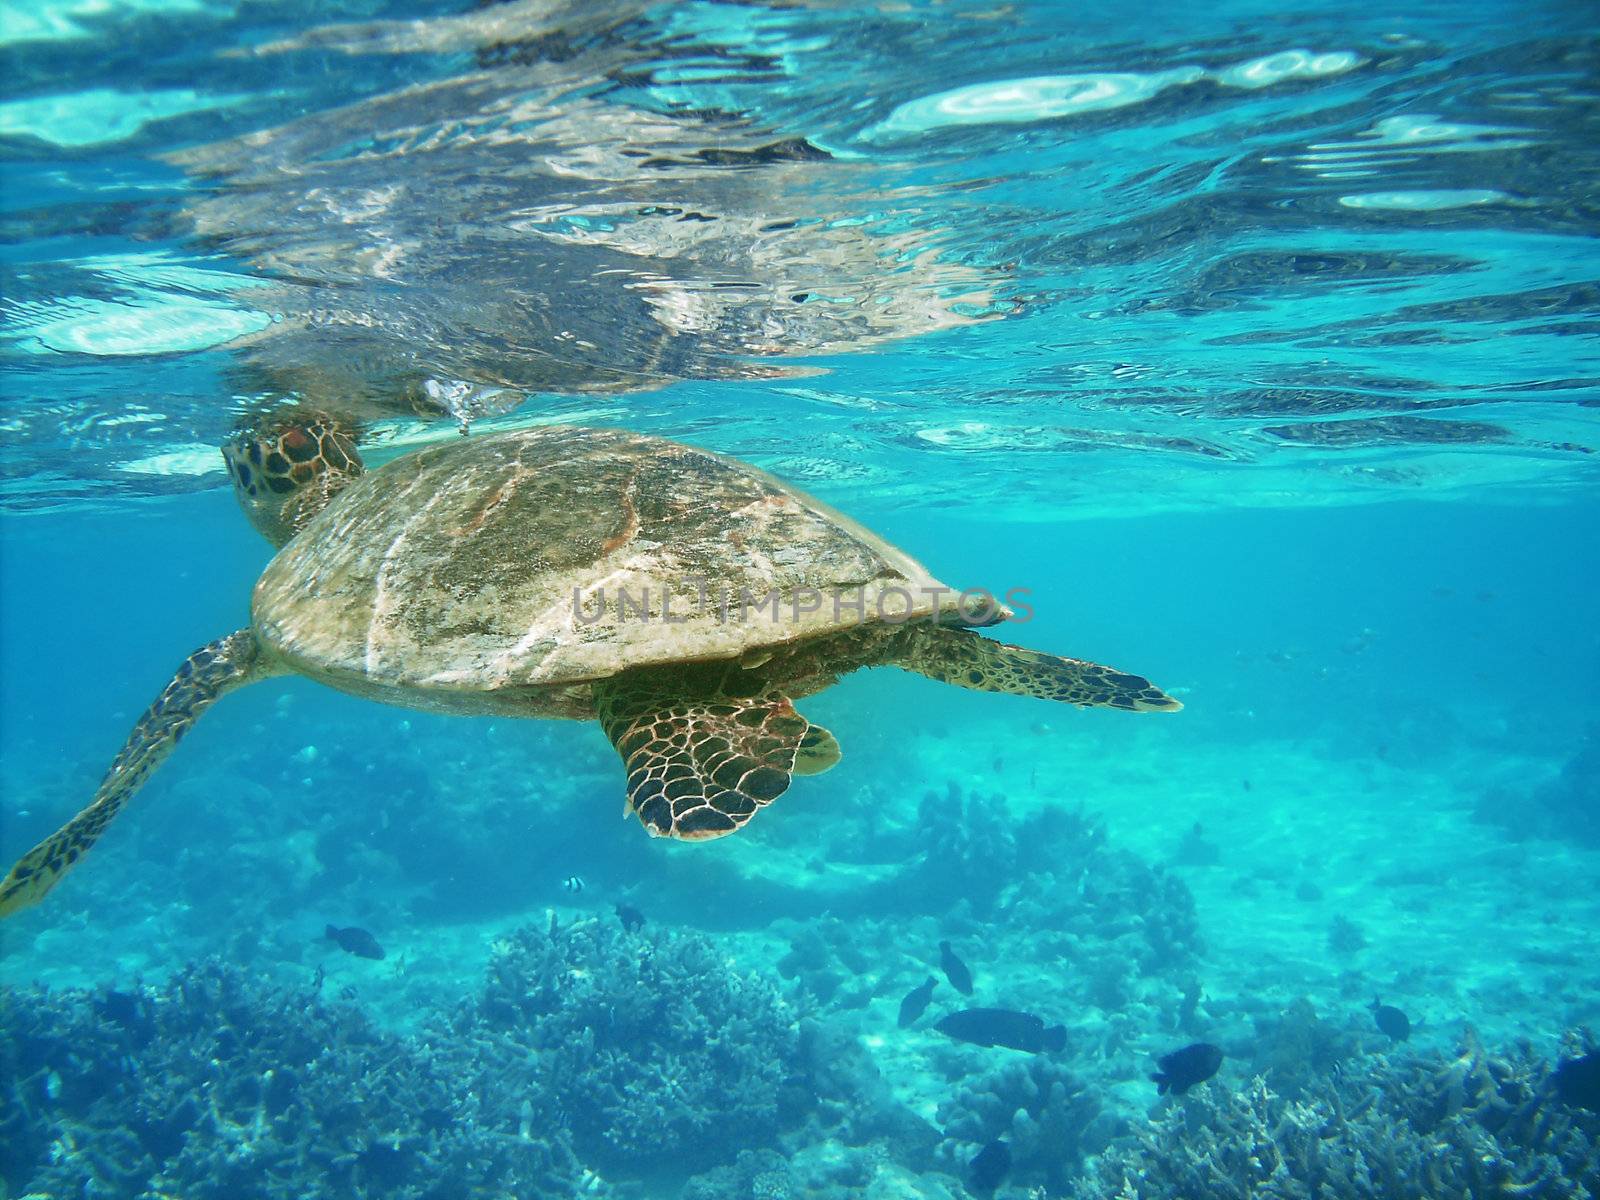 Sea turtle is swimming over a coral reef with various fish - is catching breath